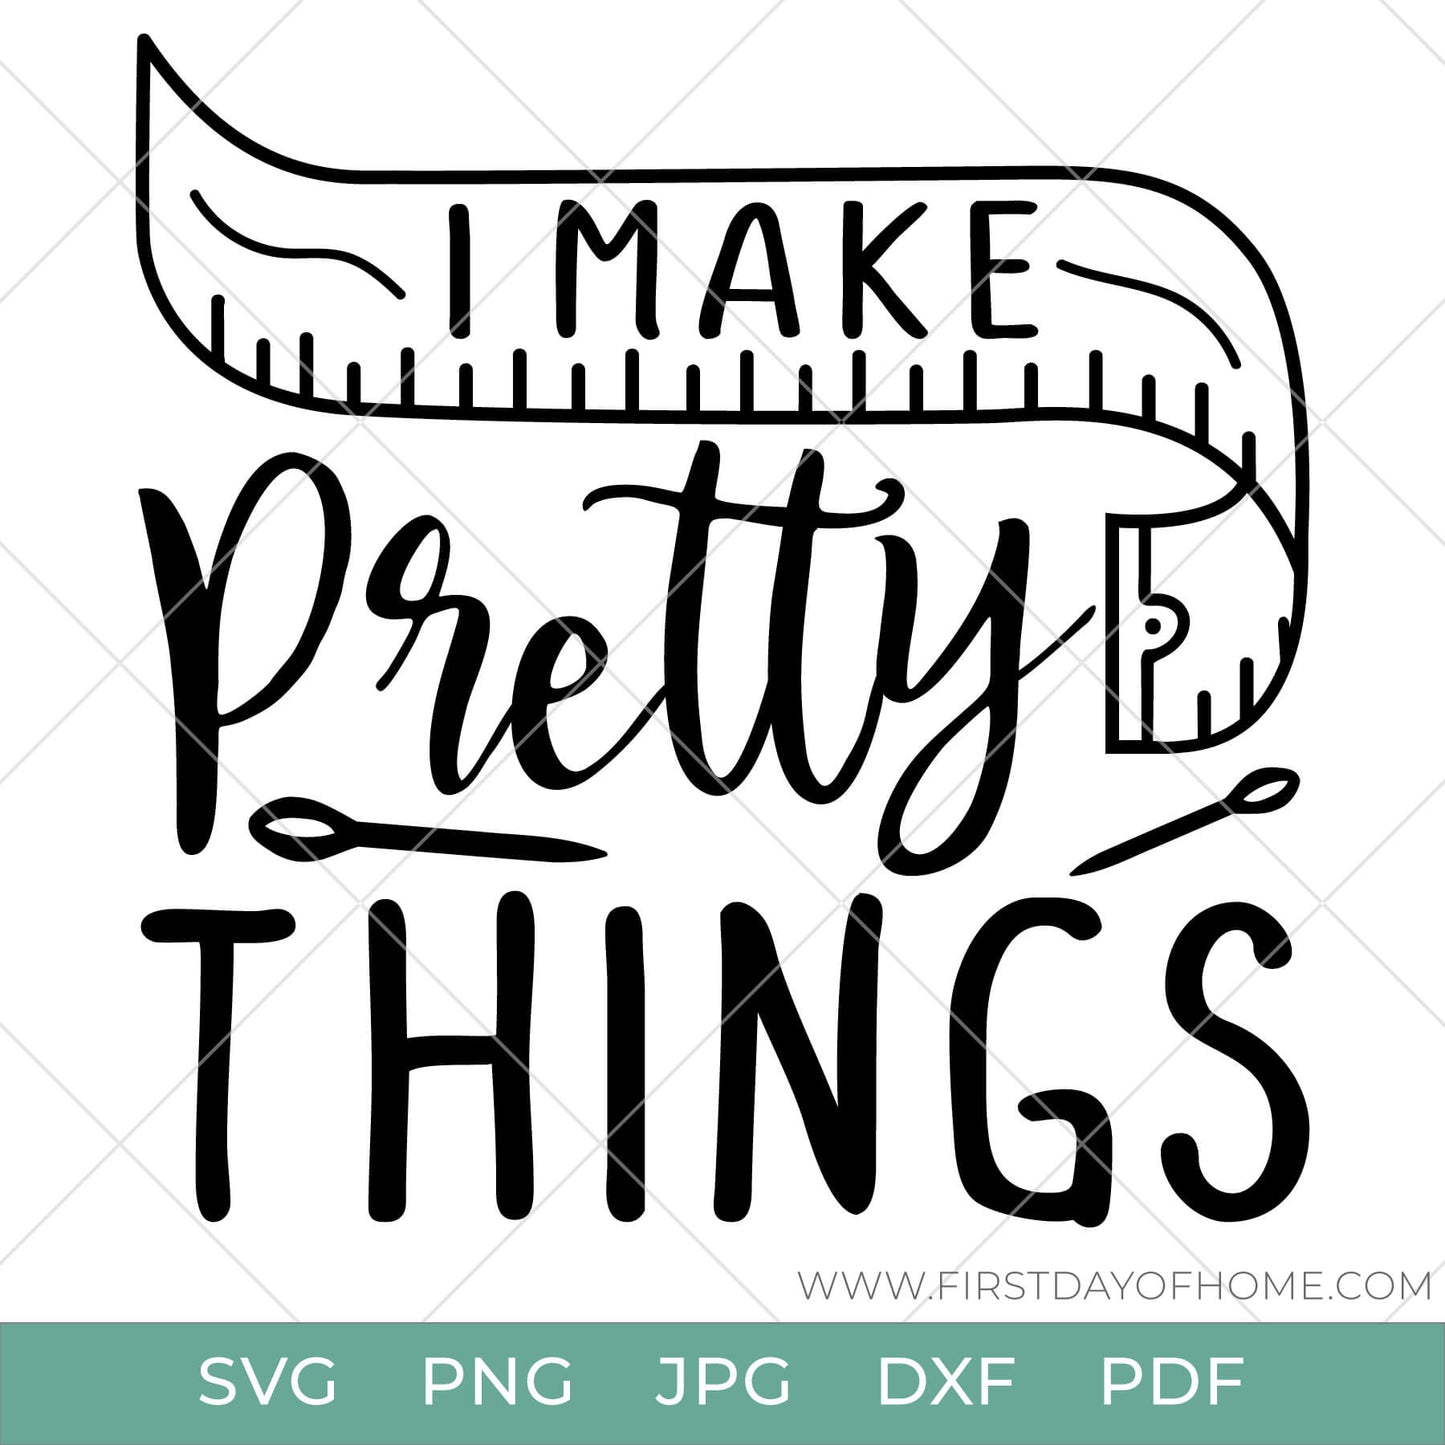 Phrase "I Make Pretty Things" with measuring tape and sewing needle digital design file for Cricut or Cameo